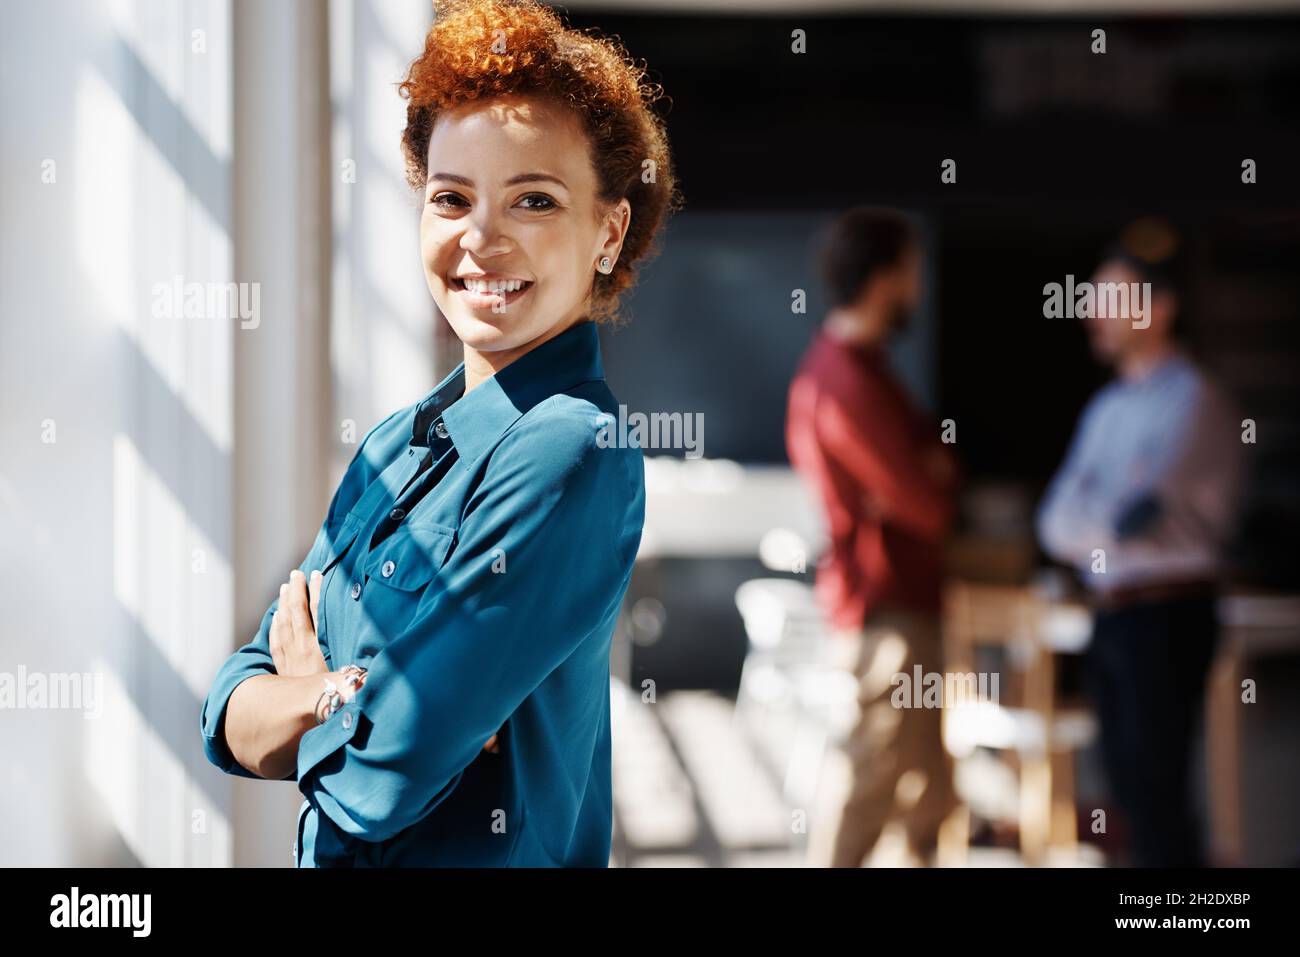 Never undermine your skills and abilities Stock Photo